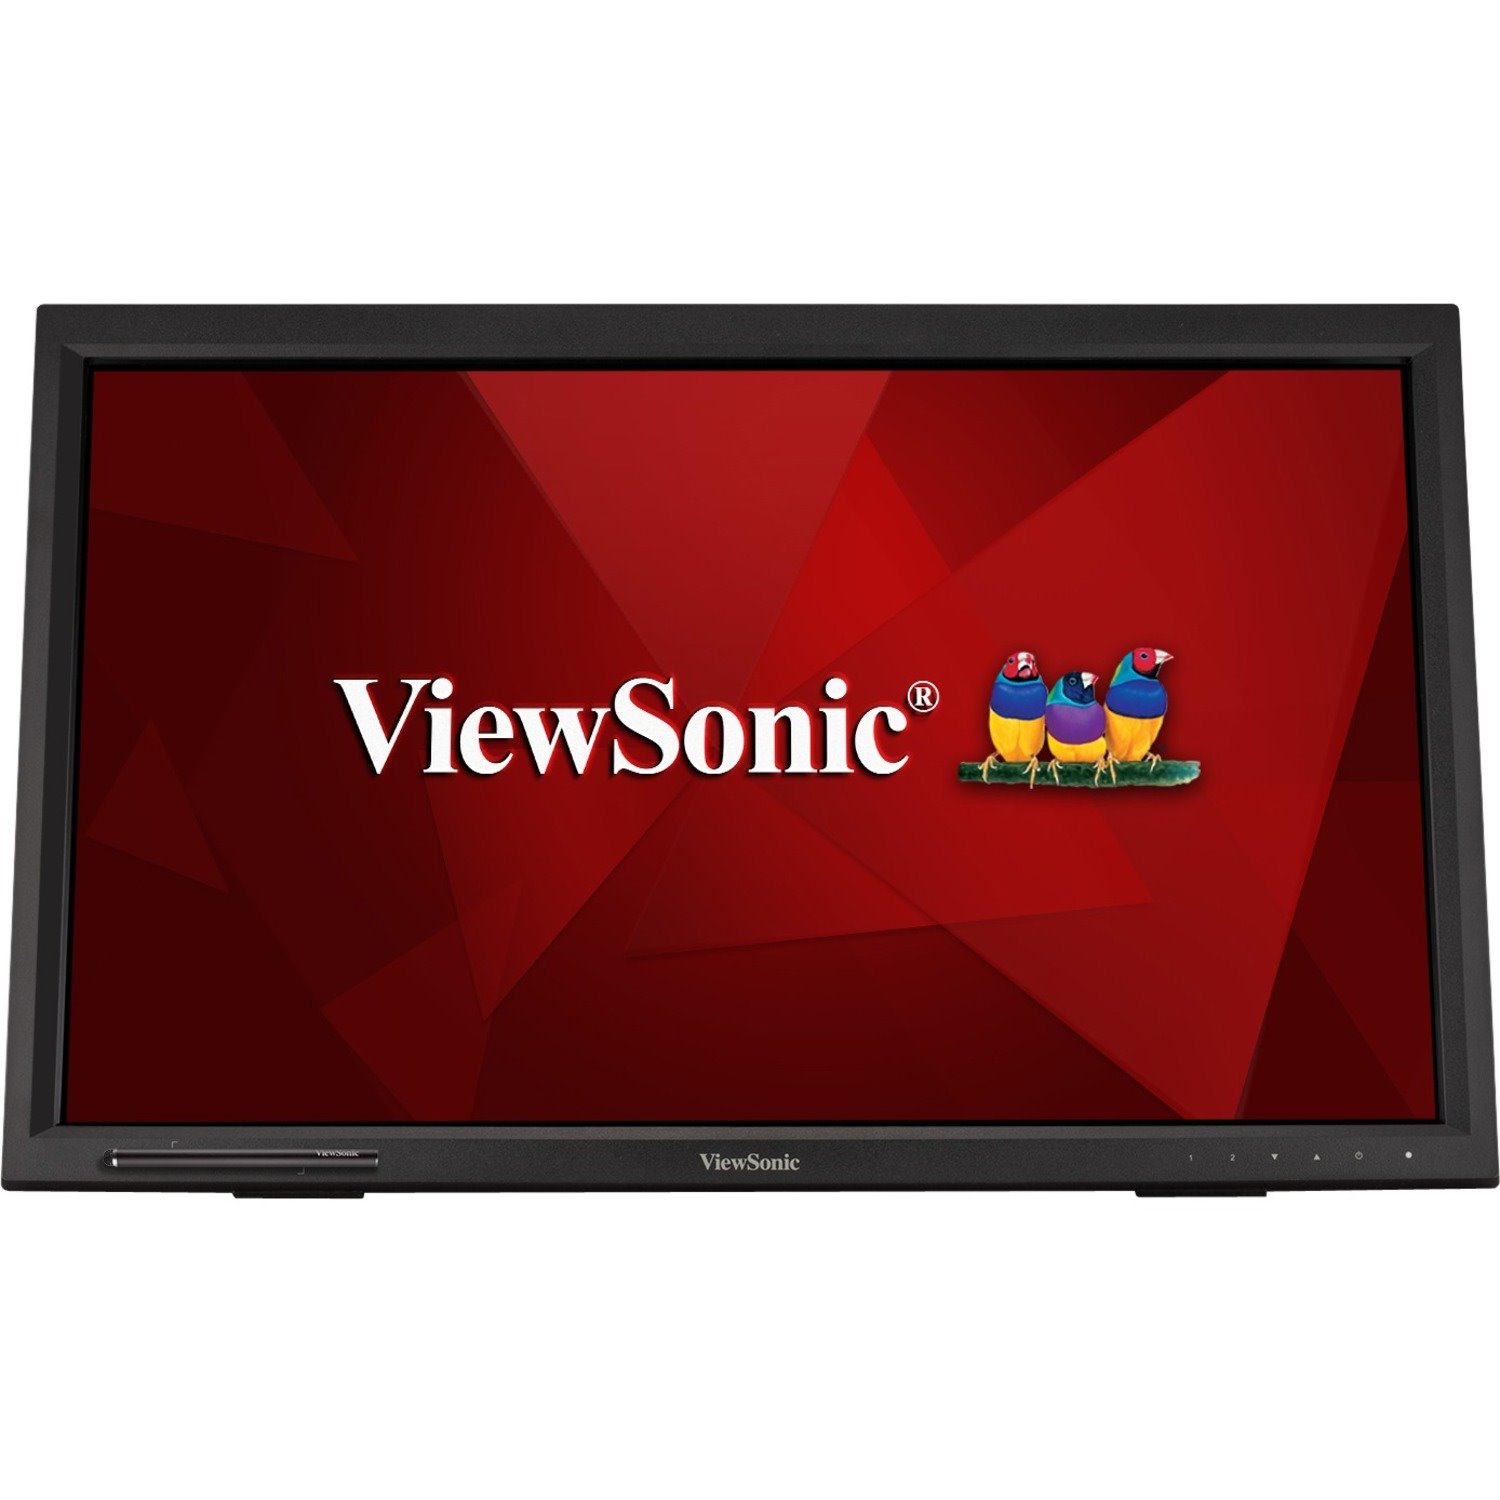 ViewSonic TD2423D 24 Inch 1080p 10-Point Multi IR Touch Screen Monitor with Eye Care HDMI, VGA, USB Hub and DisplayPort